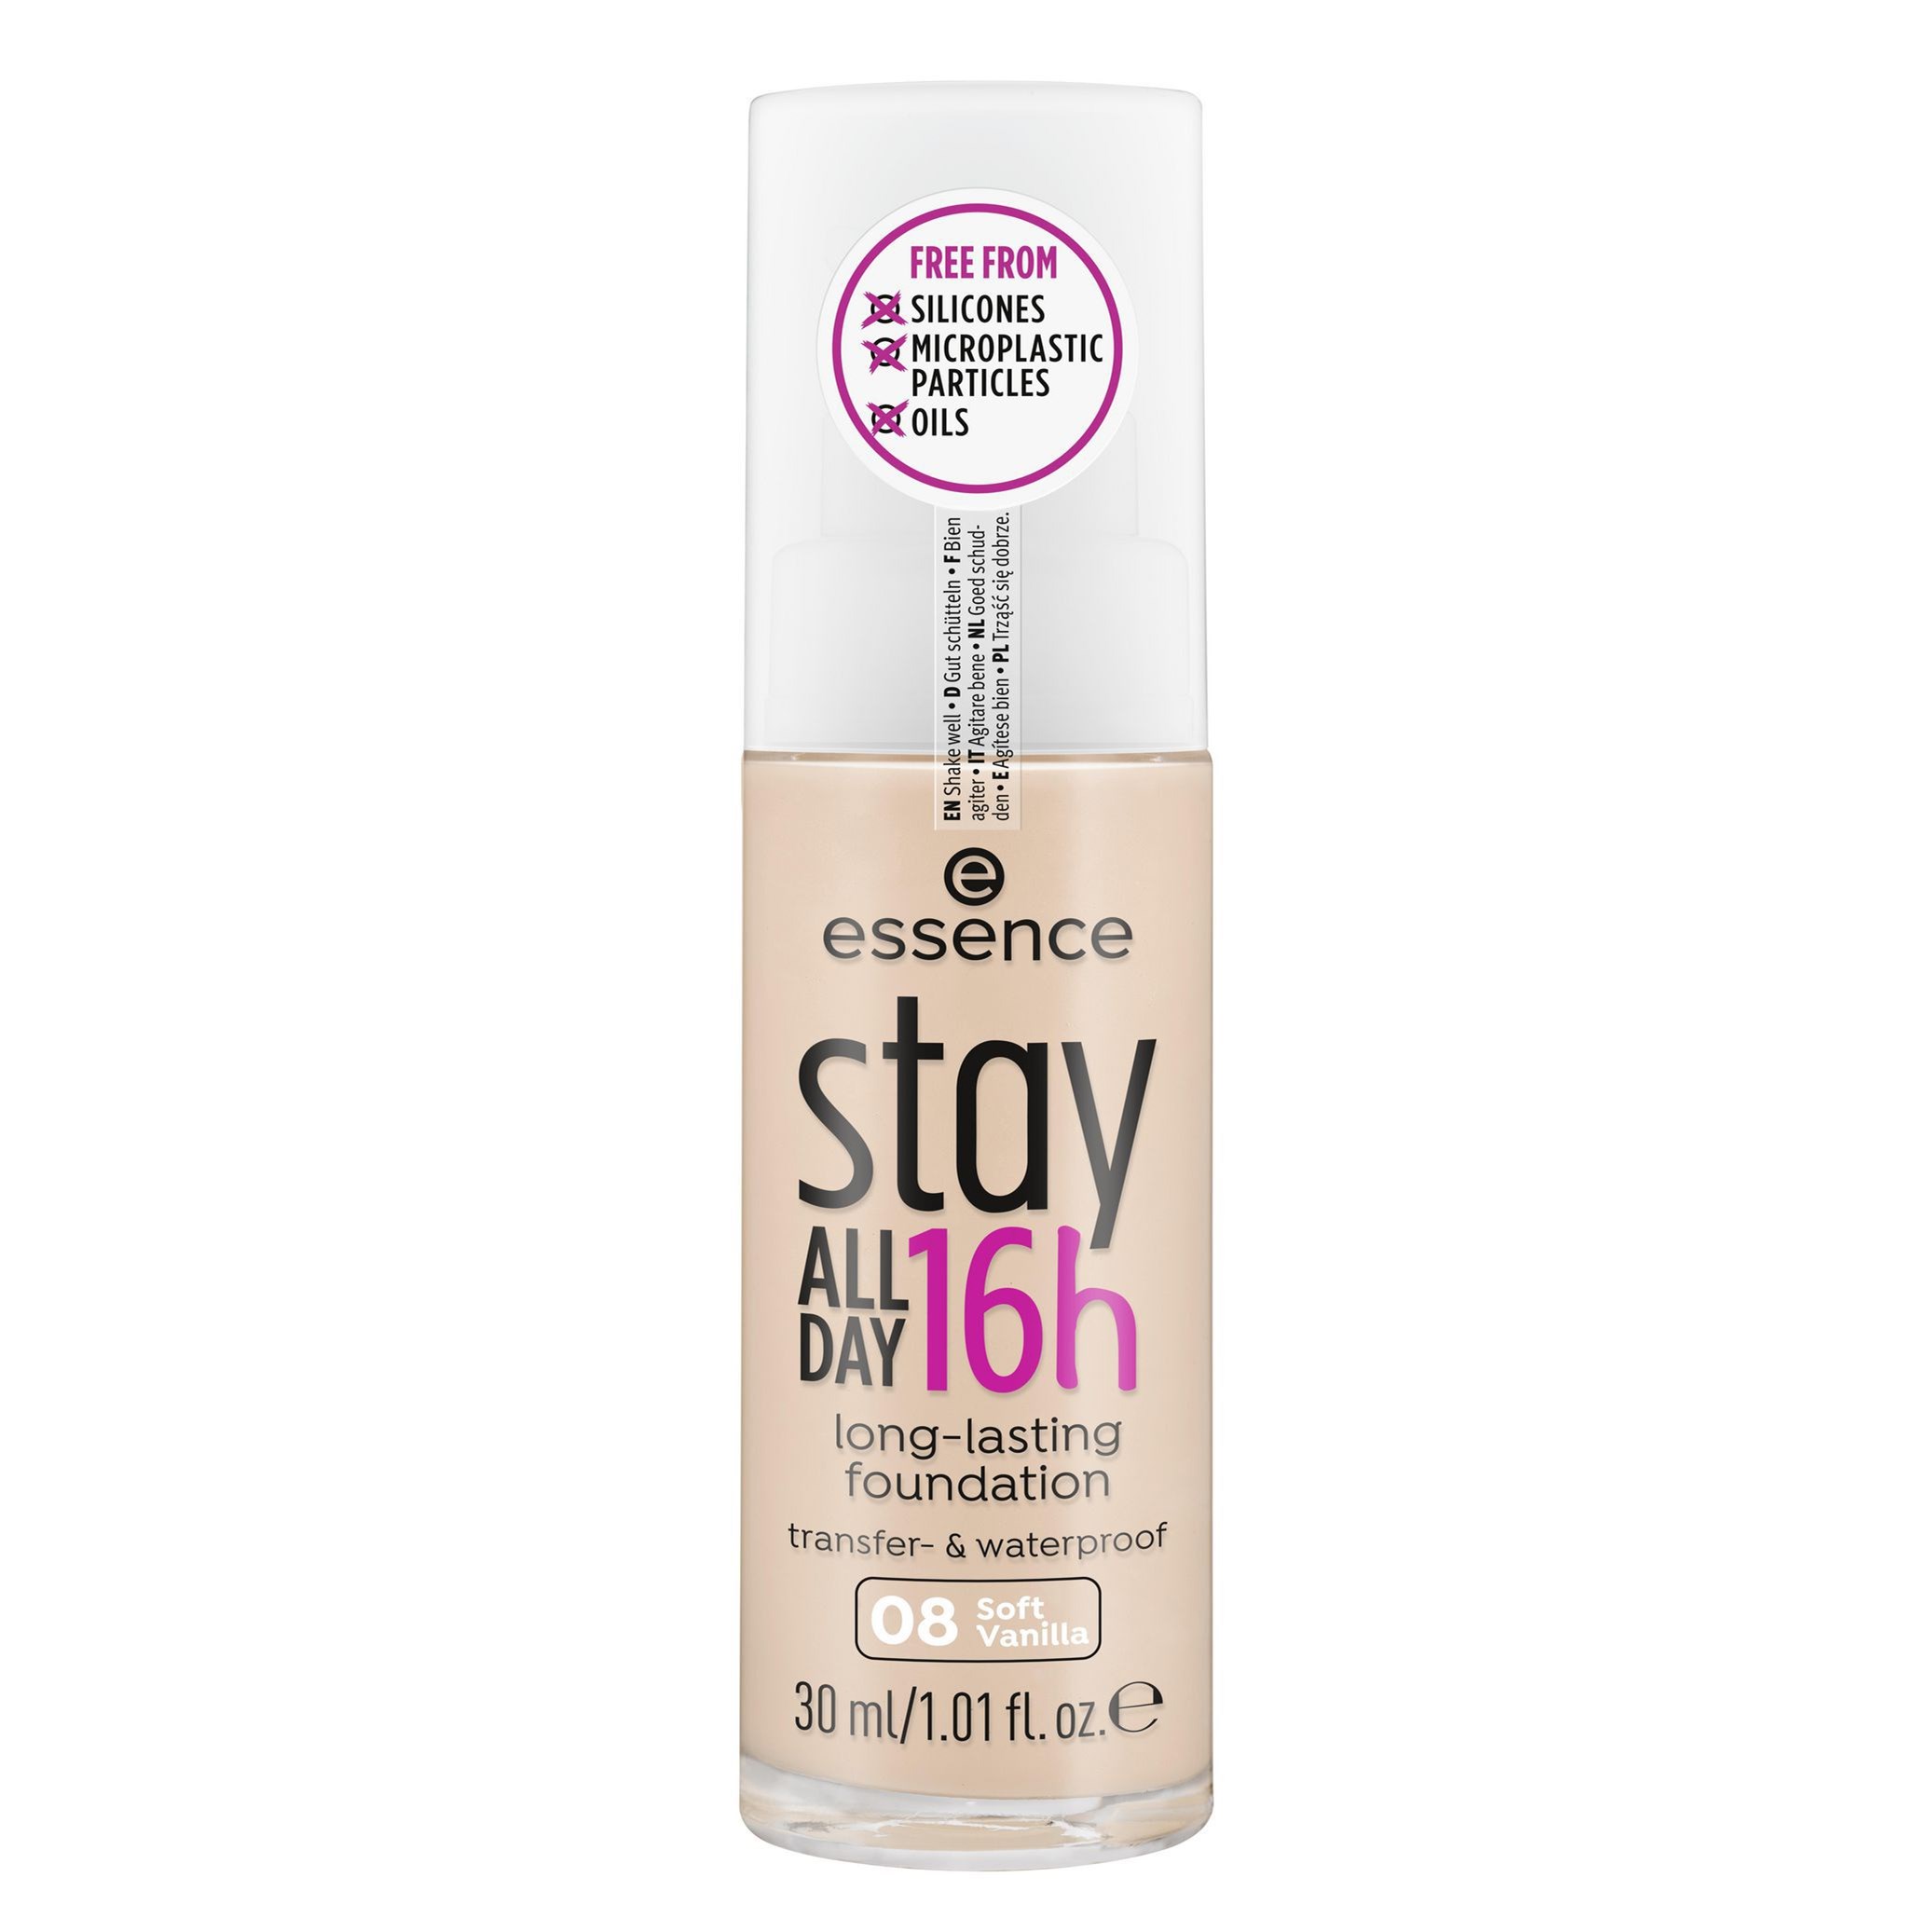 essence stay all day 16h long-lasting foundation 08 Soft Vanilla